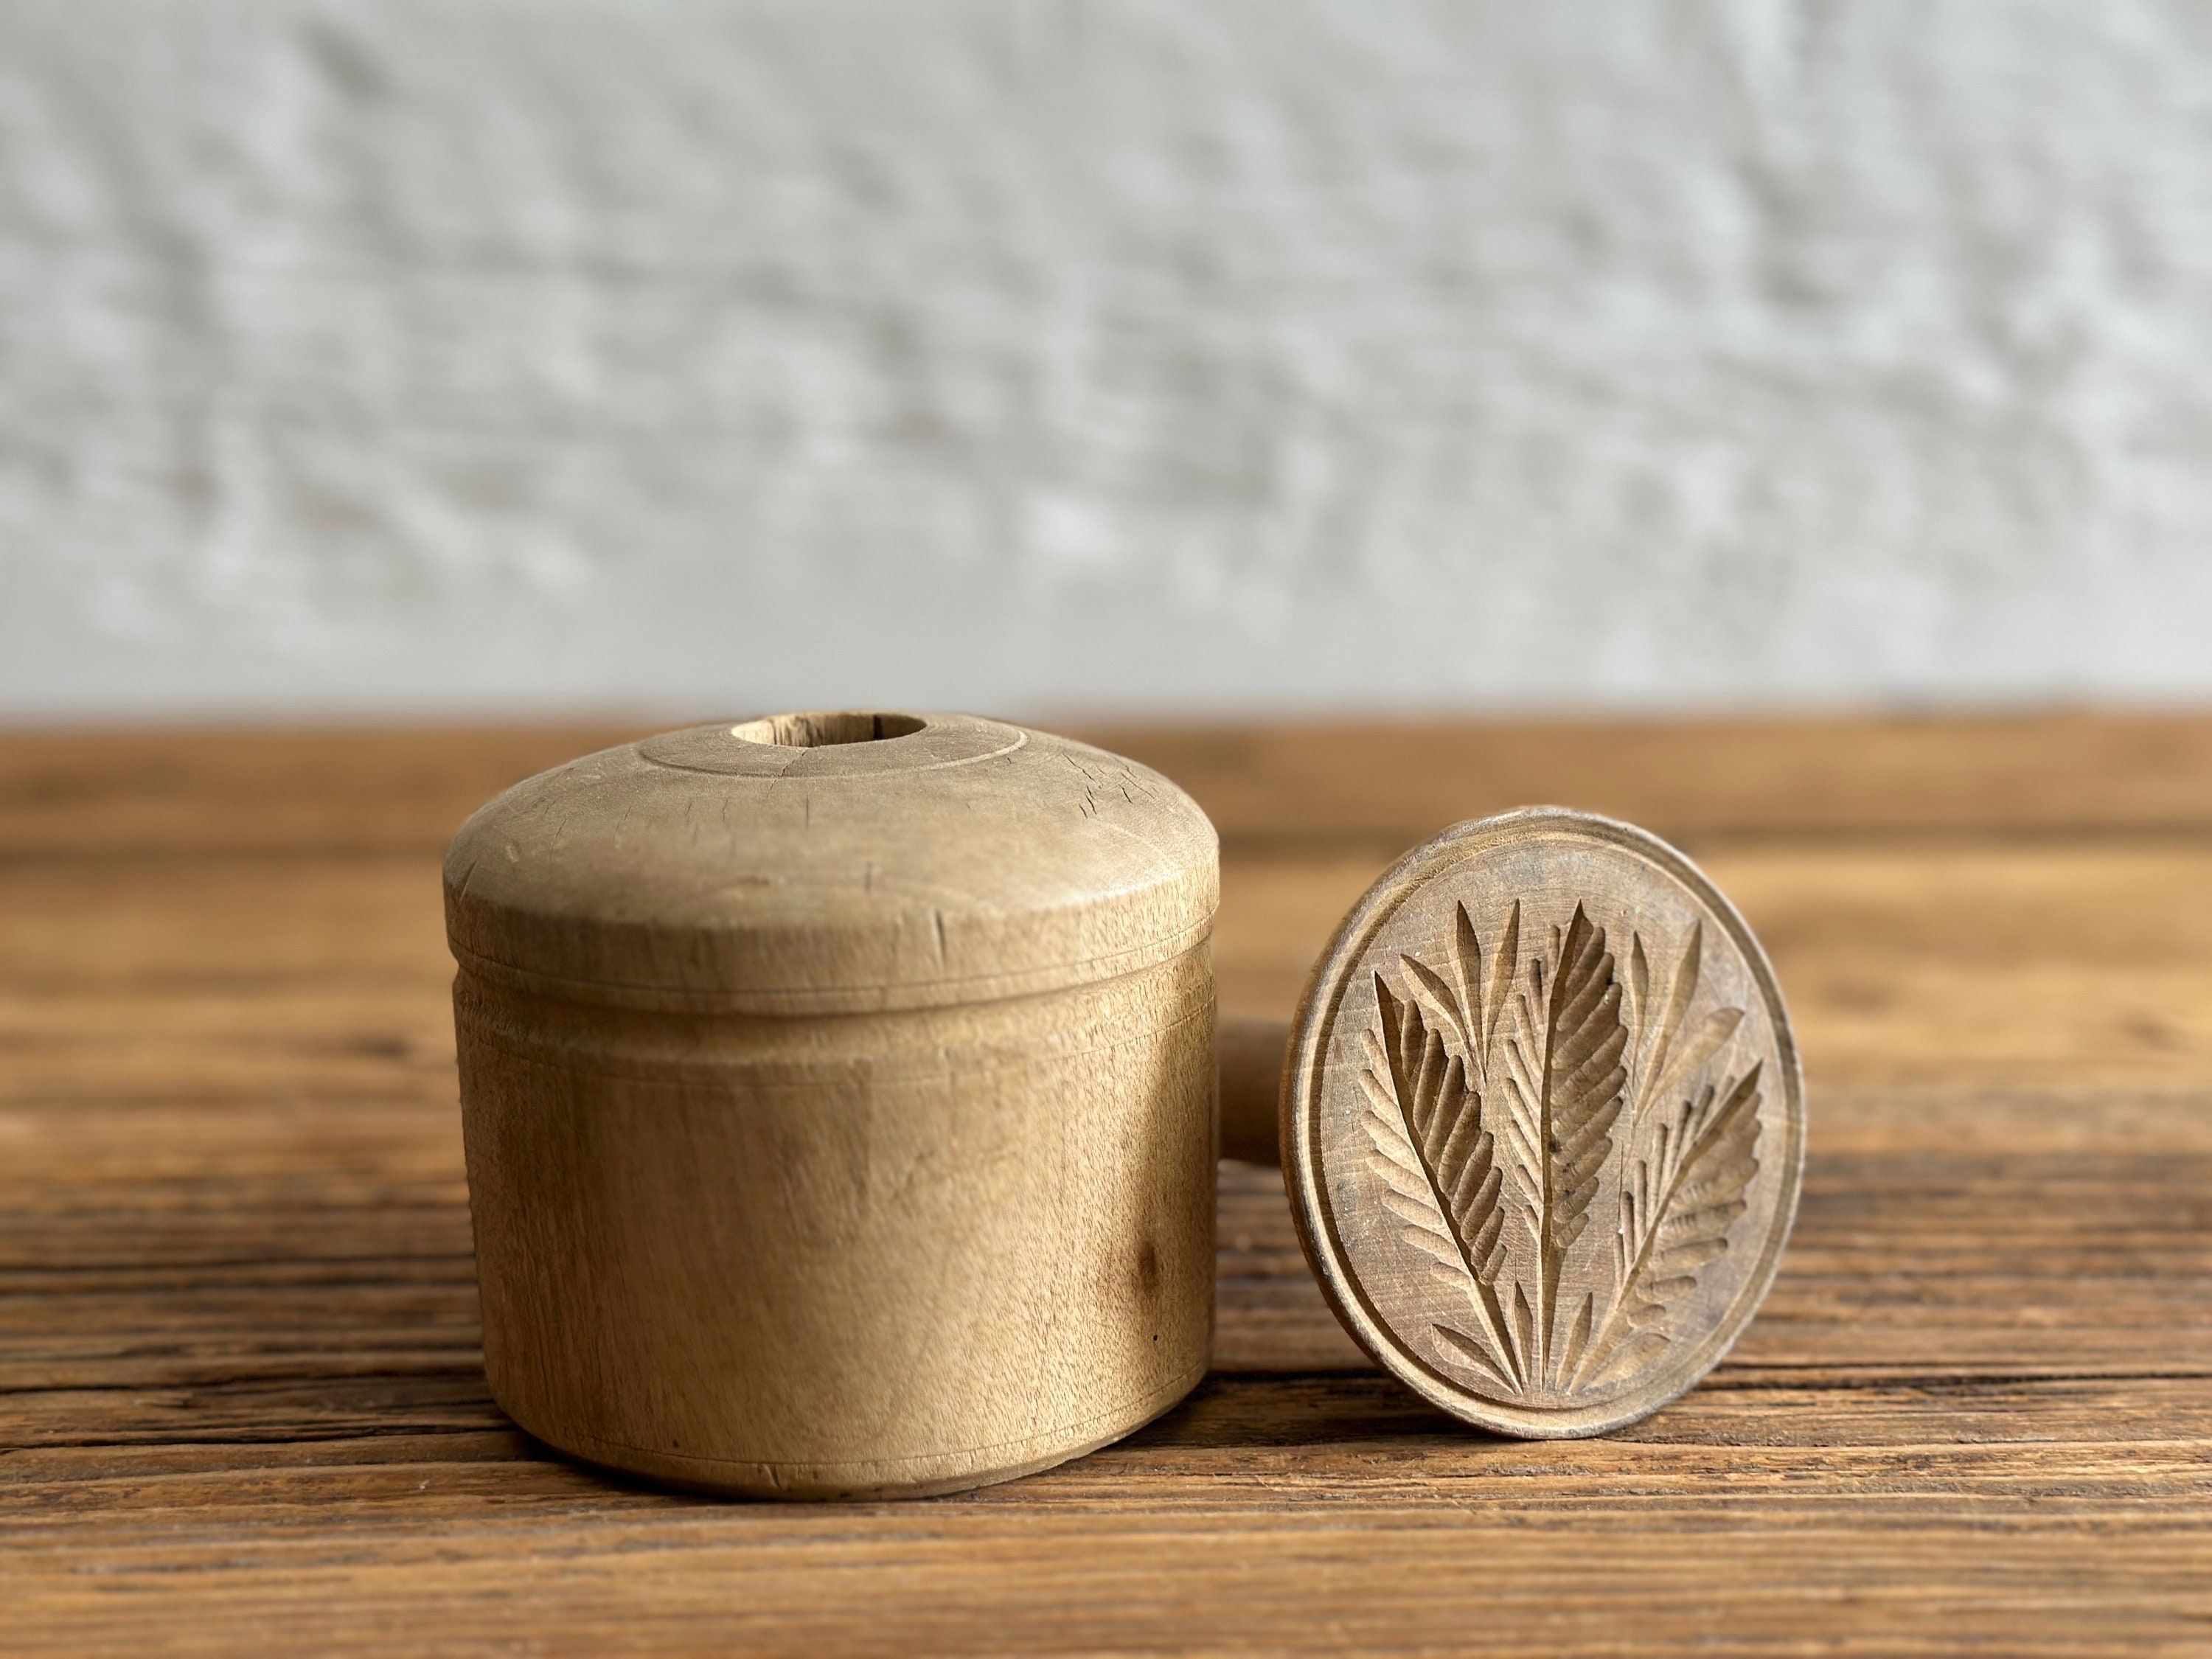 Antique Wood Butter Mold, With a Hand-carved Botanical Design